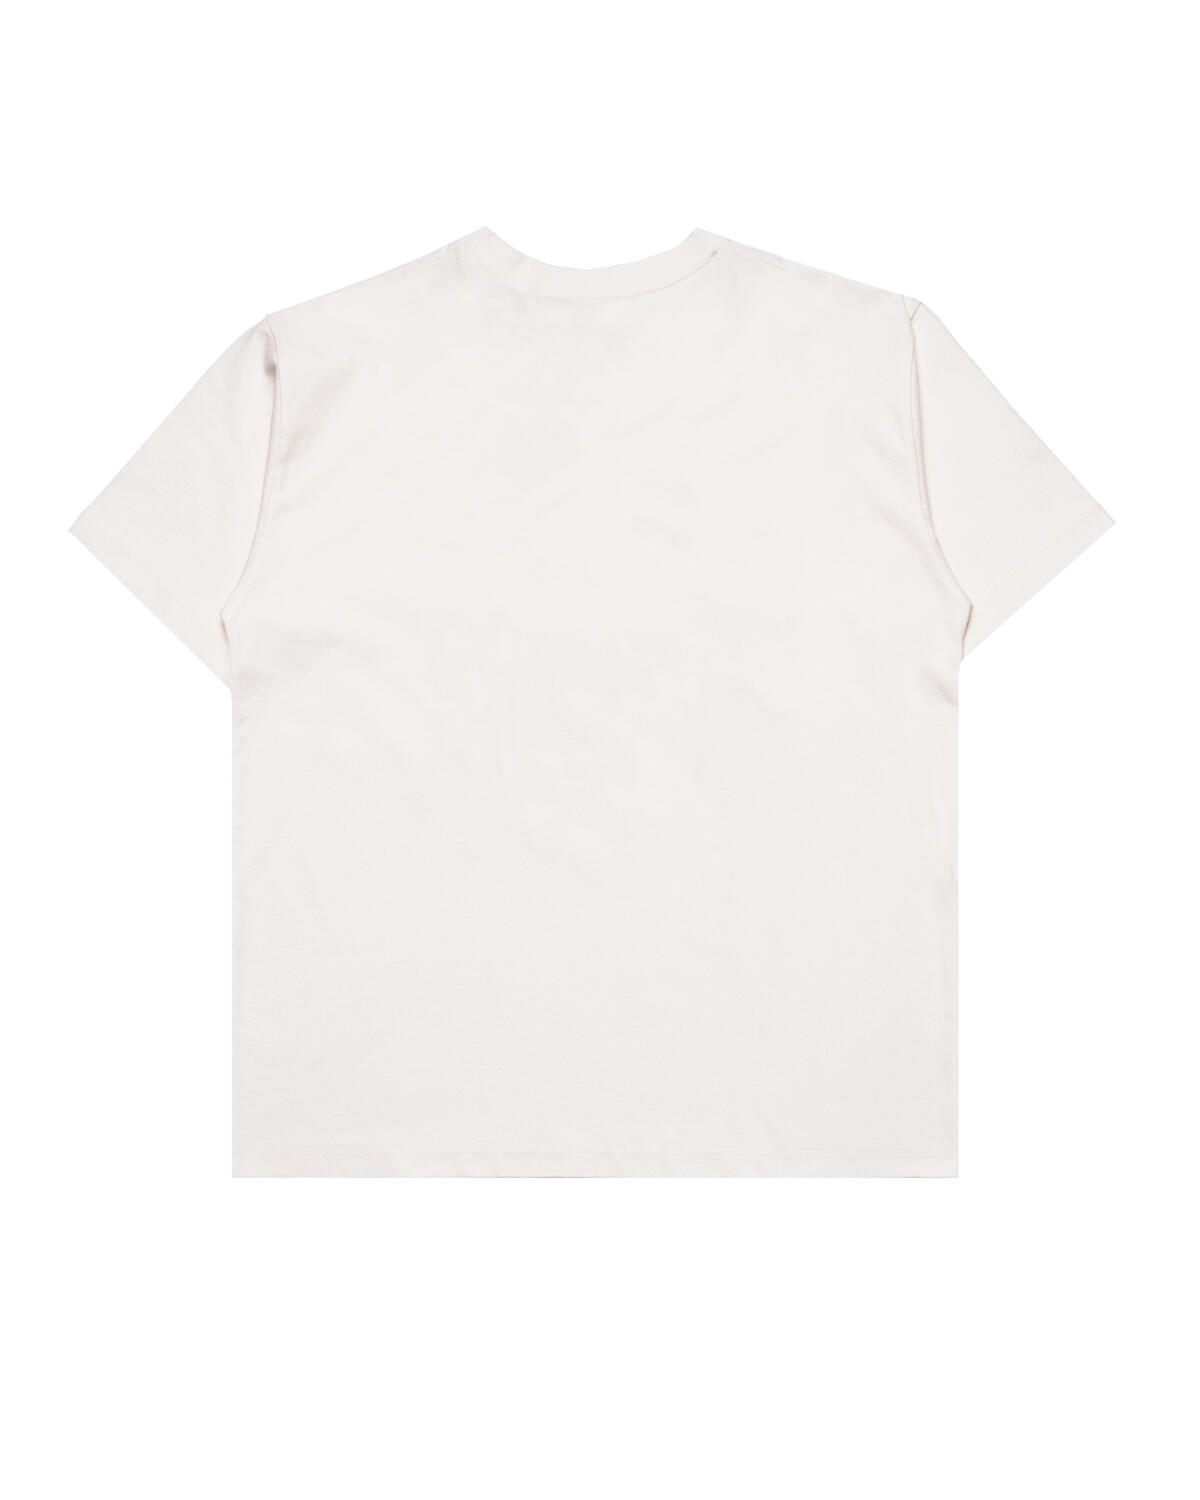 Parra T-shirt Climb Away off white for men - T-shirt  Holypopstore -  Retail innovators to fuel the culture of sneakers